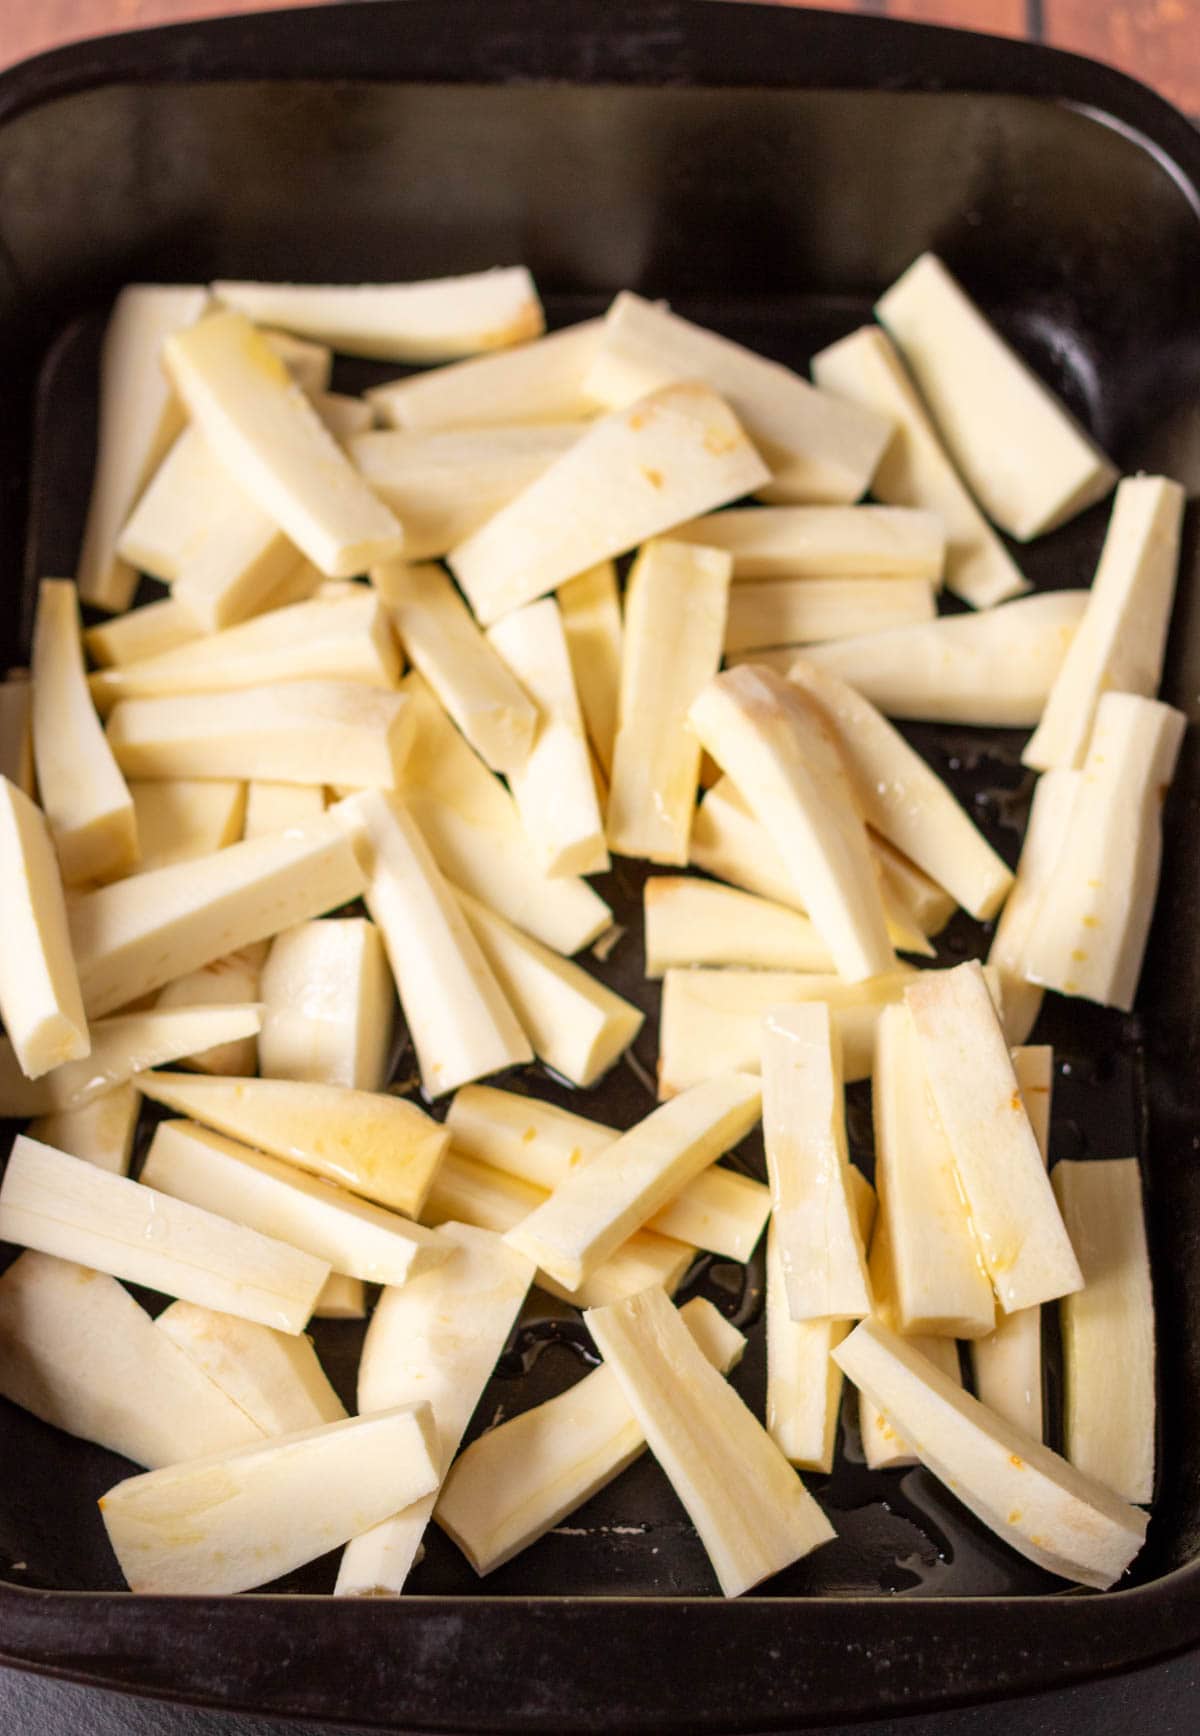 Parsnips cut up into baton shapes and placed in a roasting tin with sunflower oil and honey drizzled over.